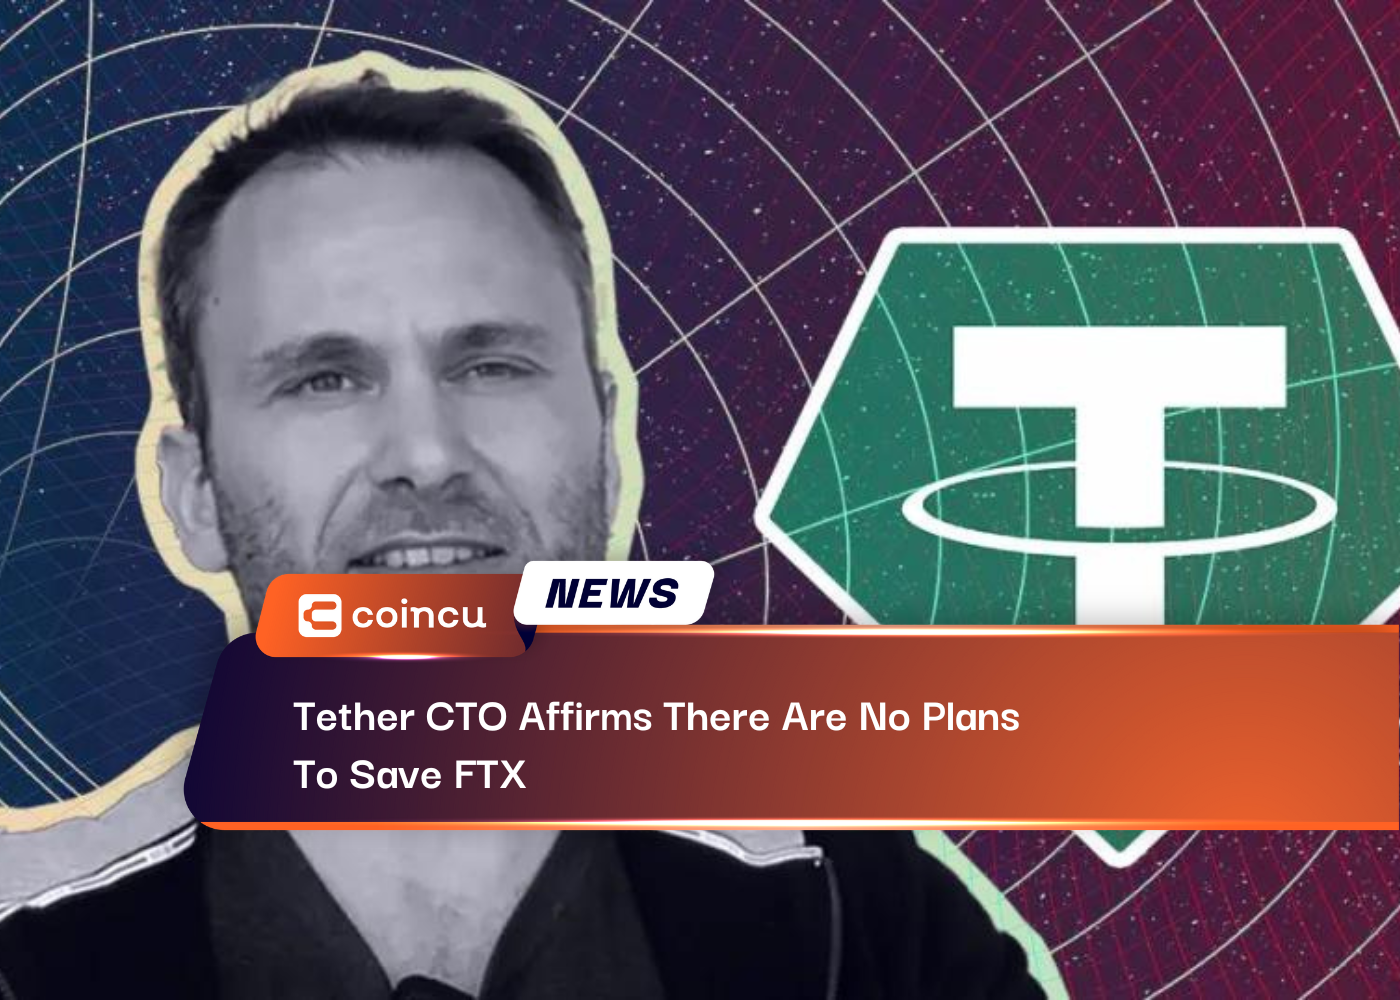 Tether CTO Affirms There Are No Plans